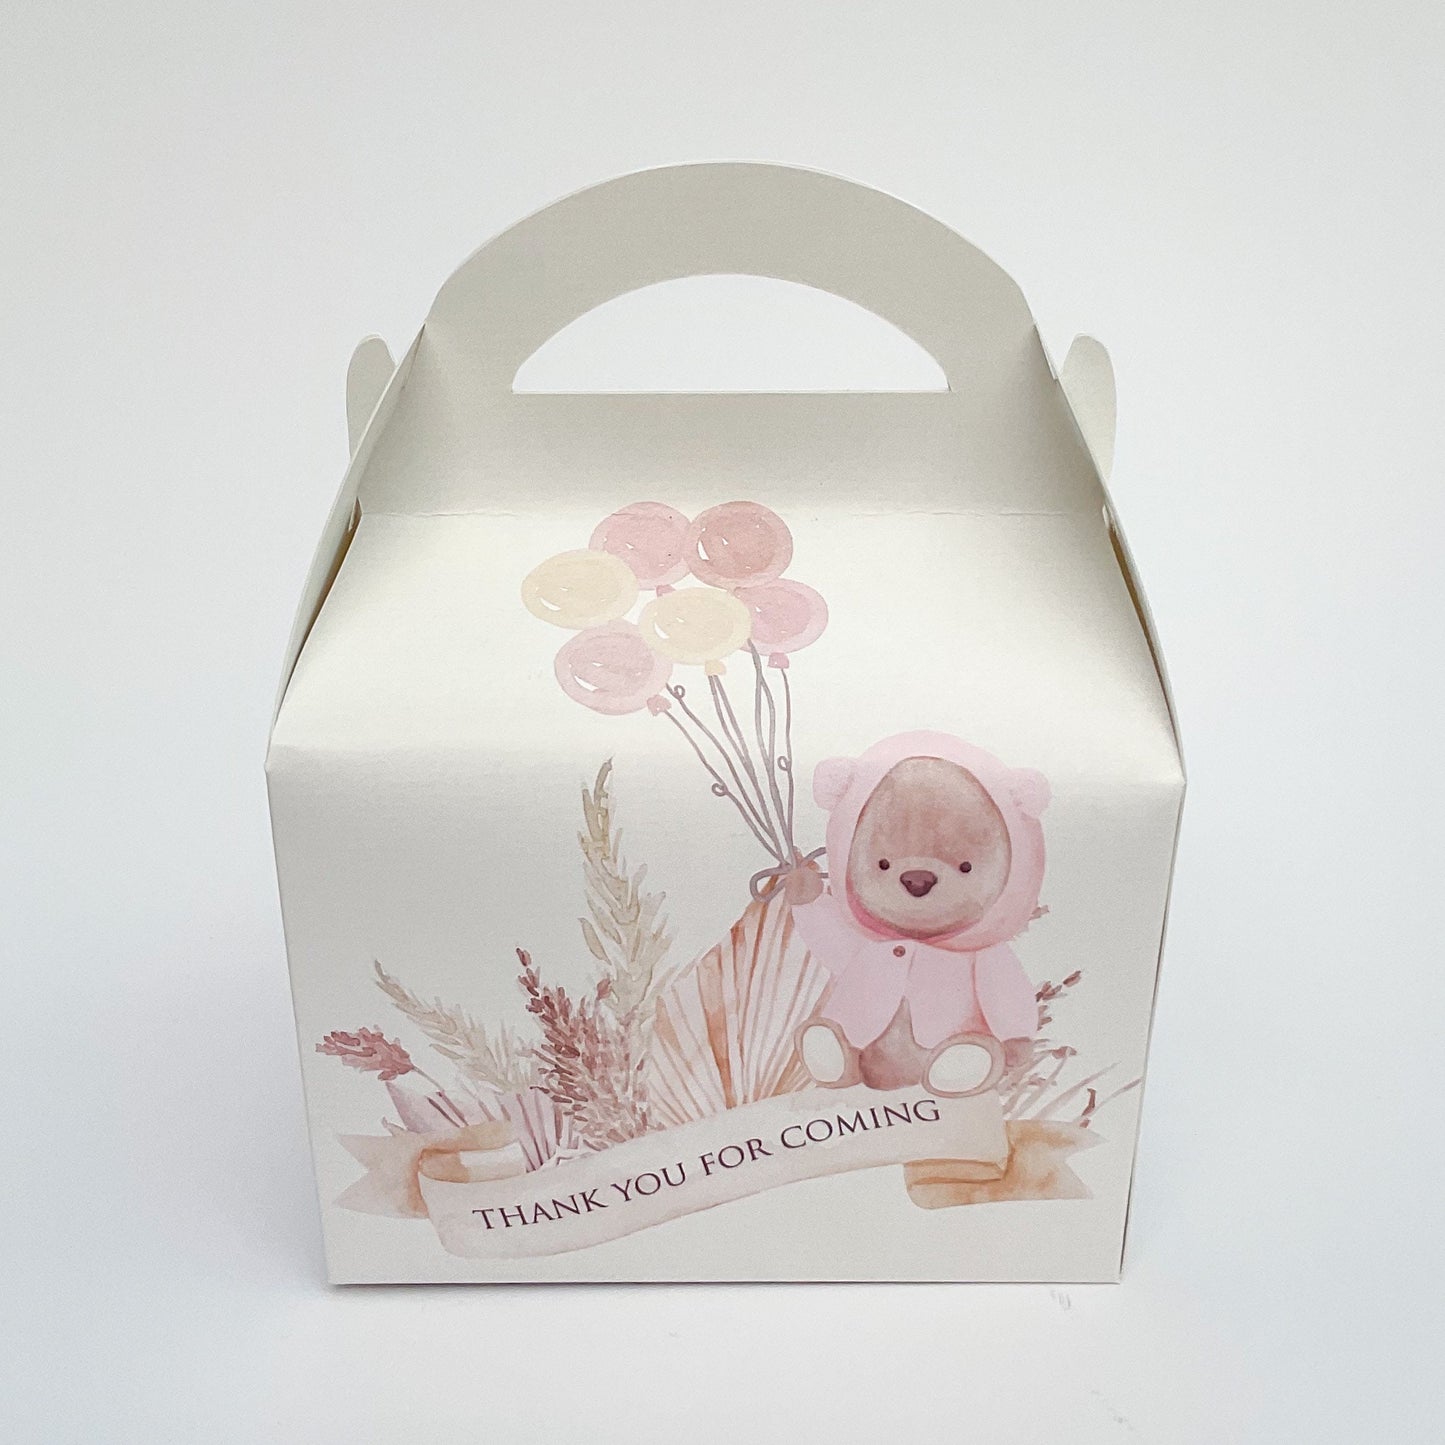 Watercolour Neutral Boho Teddy Bears and Balloons Personalised Children’s Party Box Gift Bag Favour